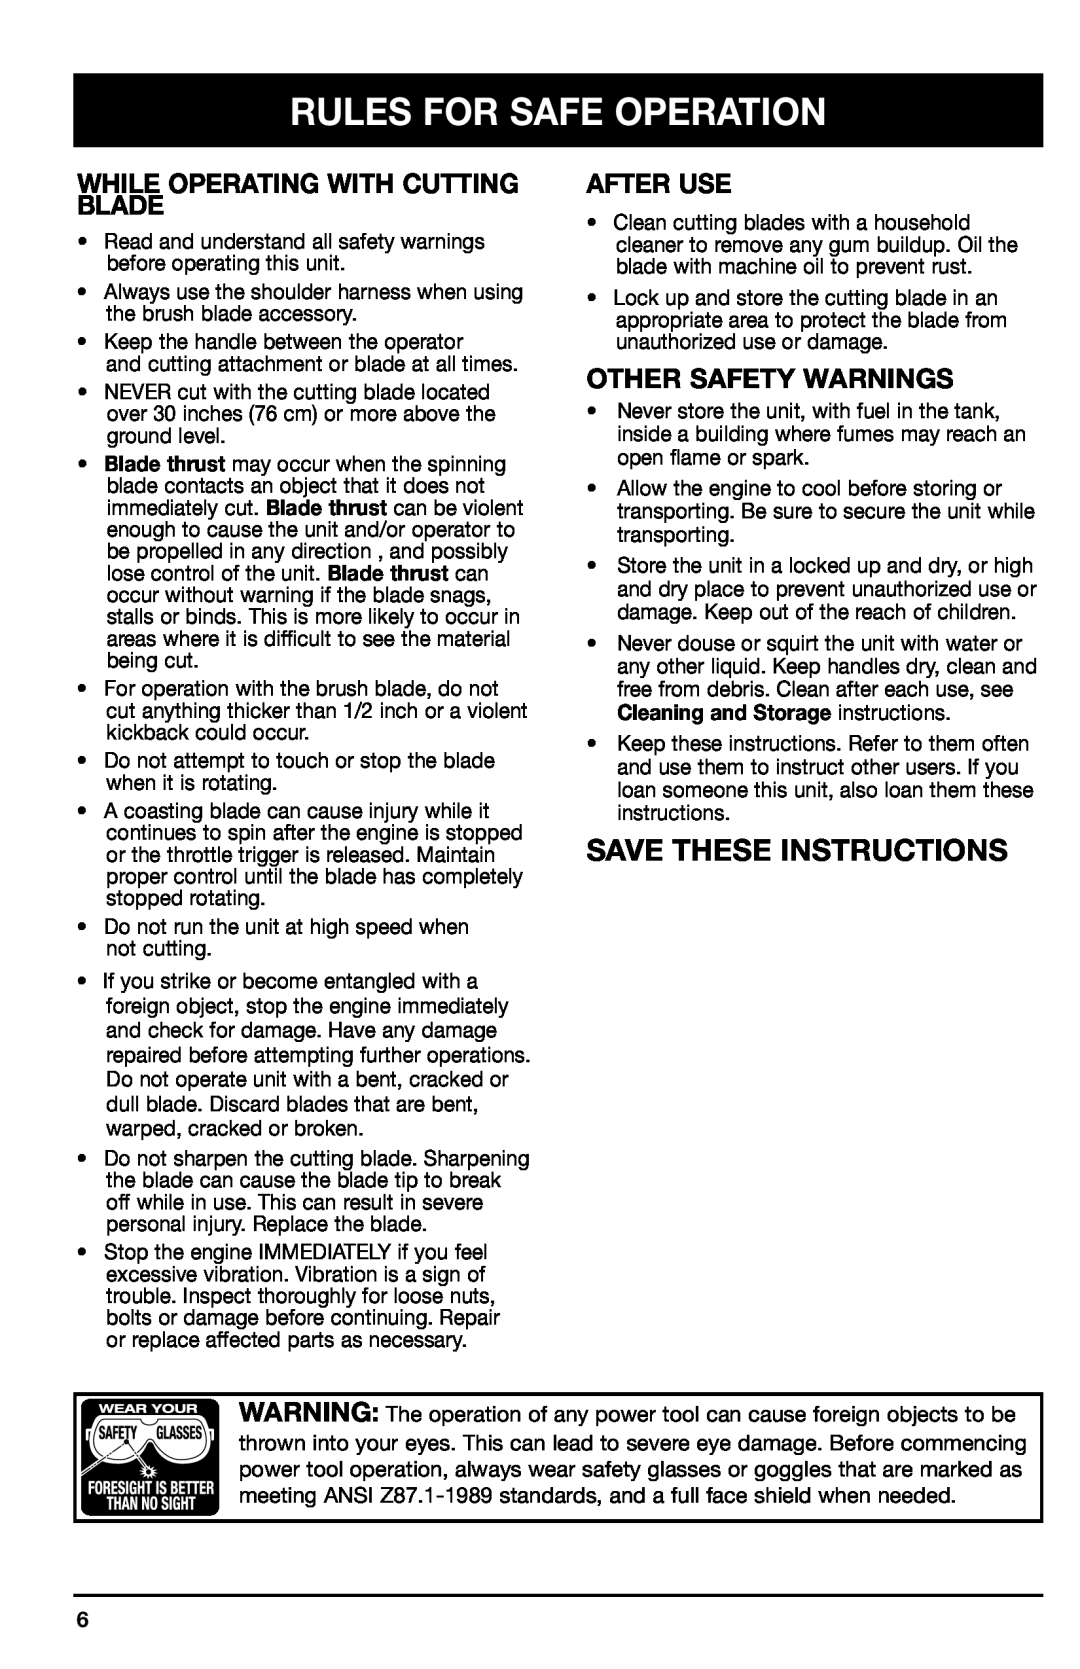 Ryobi 780r manual Save These Instructions, While Operating With Cutting Blade, After Use, Other Safety Warnings 